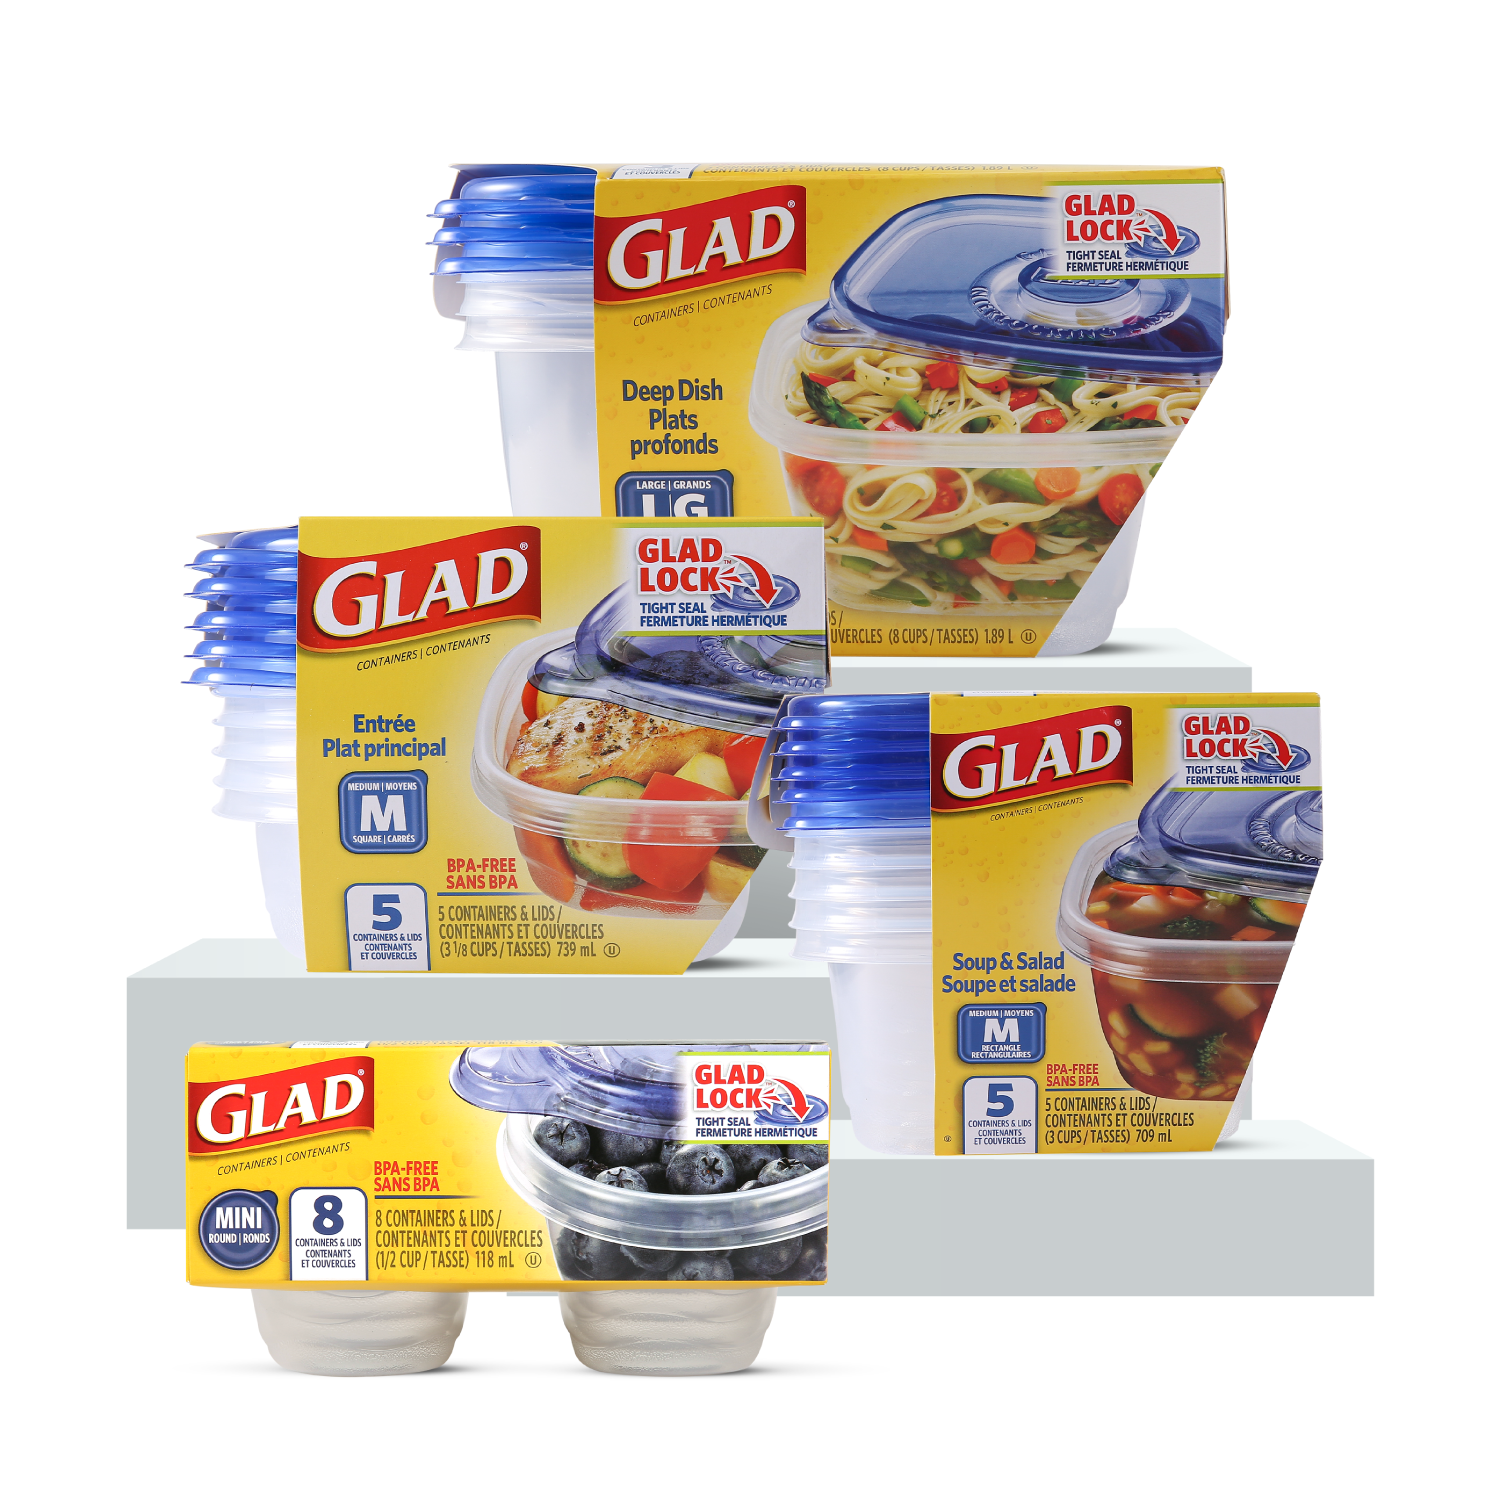 Glad GladWare Matchware Food Storage Containers, Value Pack With Easy Color  Match Lids, 20 Piece Set (Pack of 2) - With Glad Lock Tight Seal, BPA Free